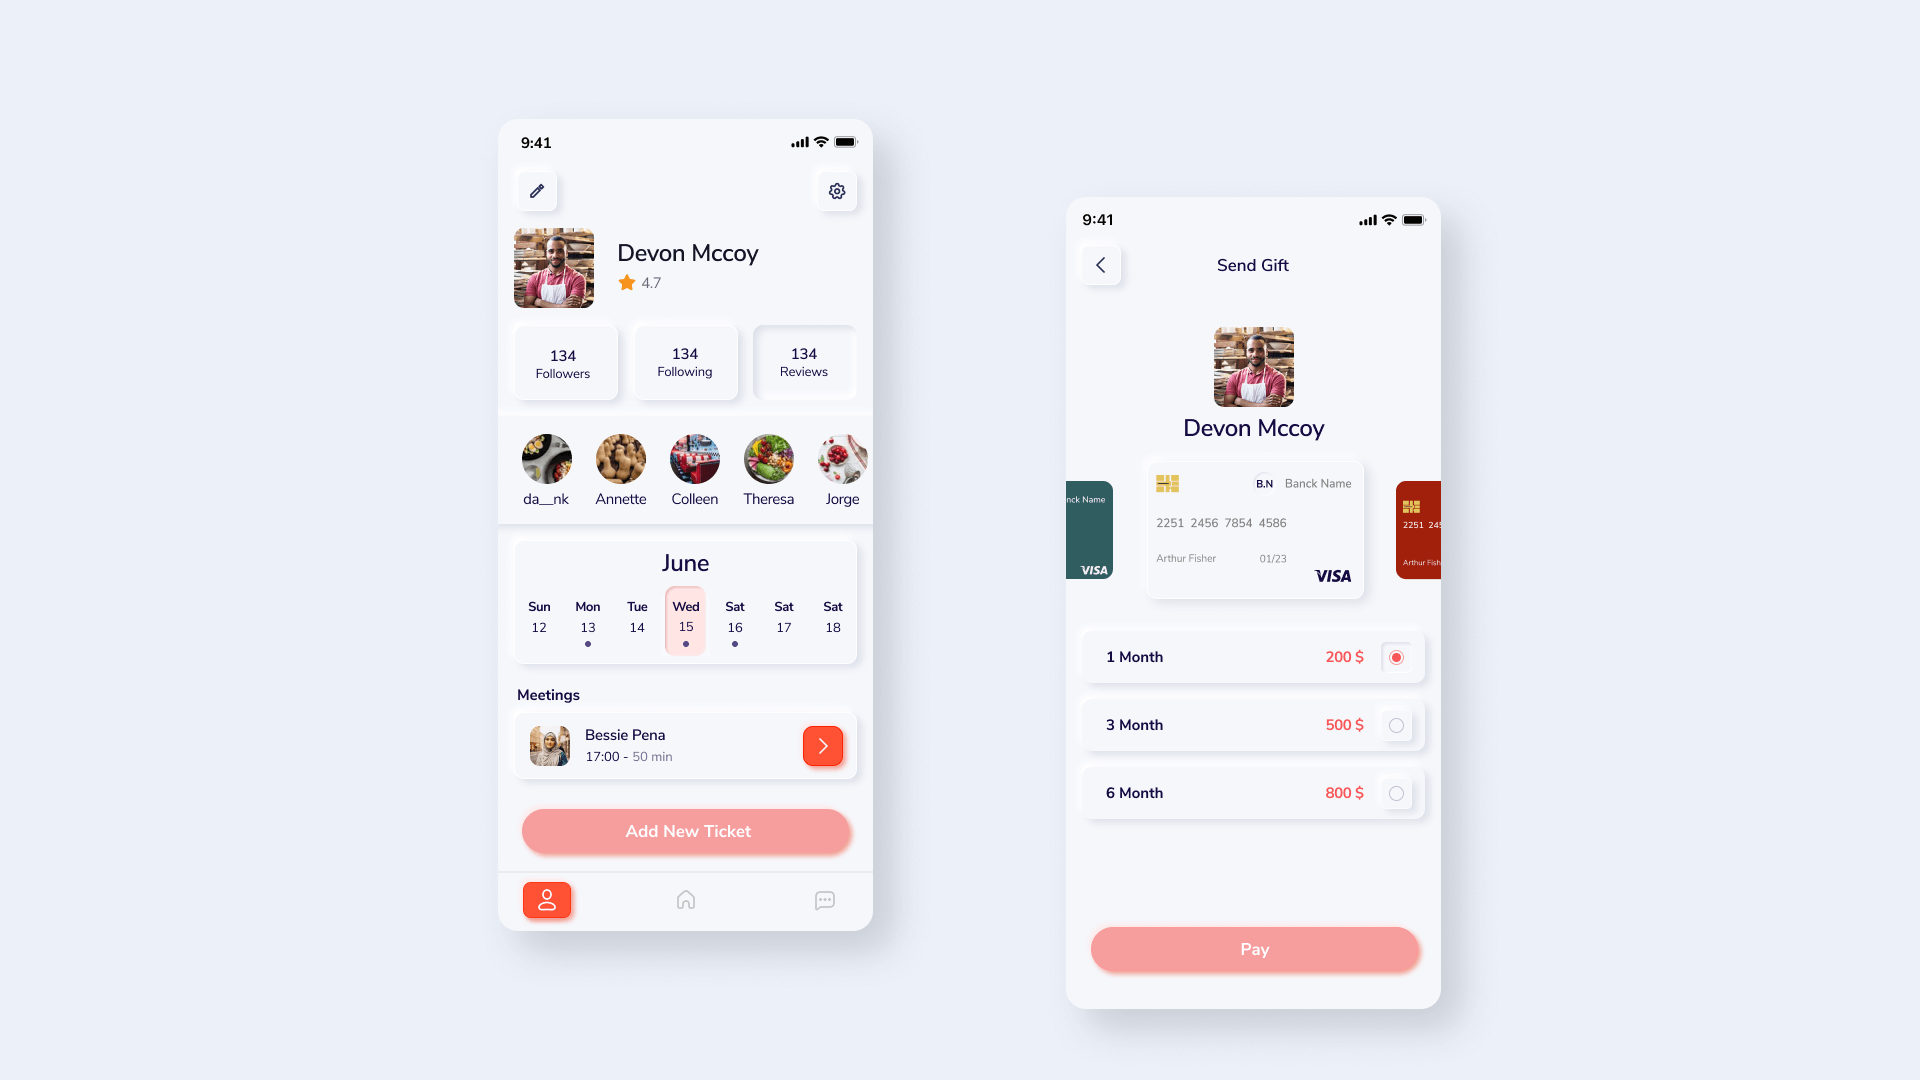 neumorphism, or soft UI, is one of the hottest UI trends that combines best achievements of flat design and skeuomorphism